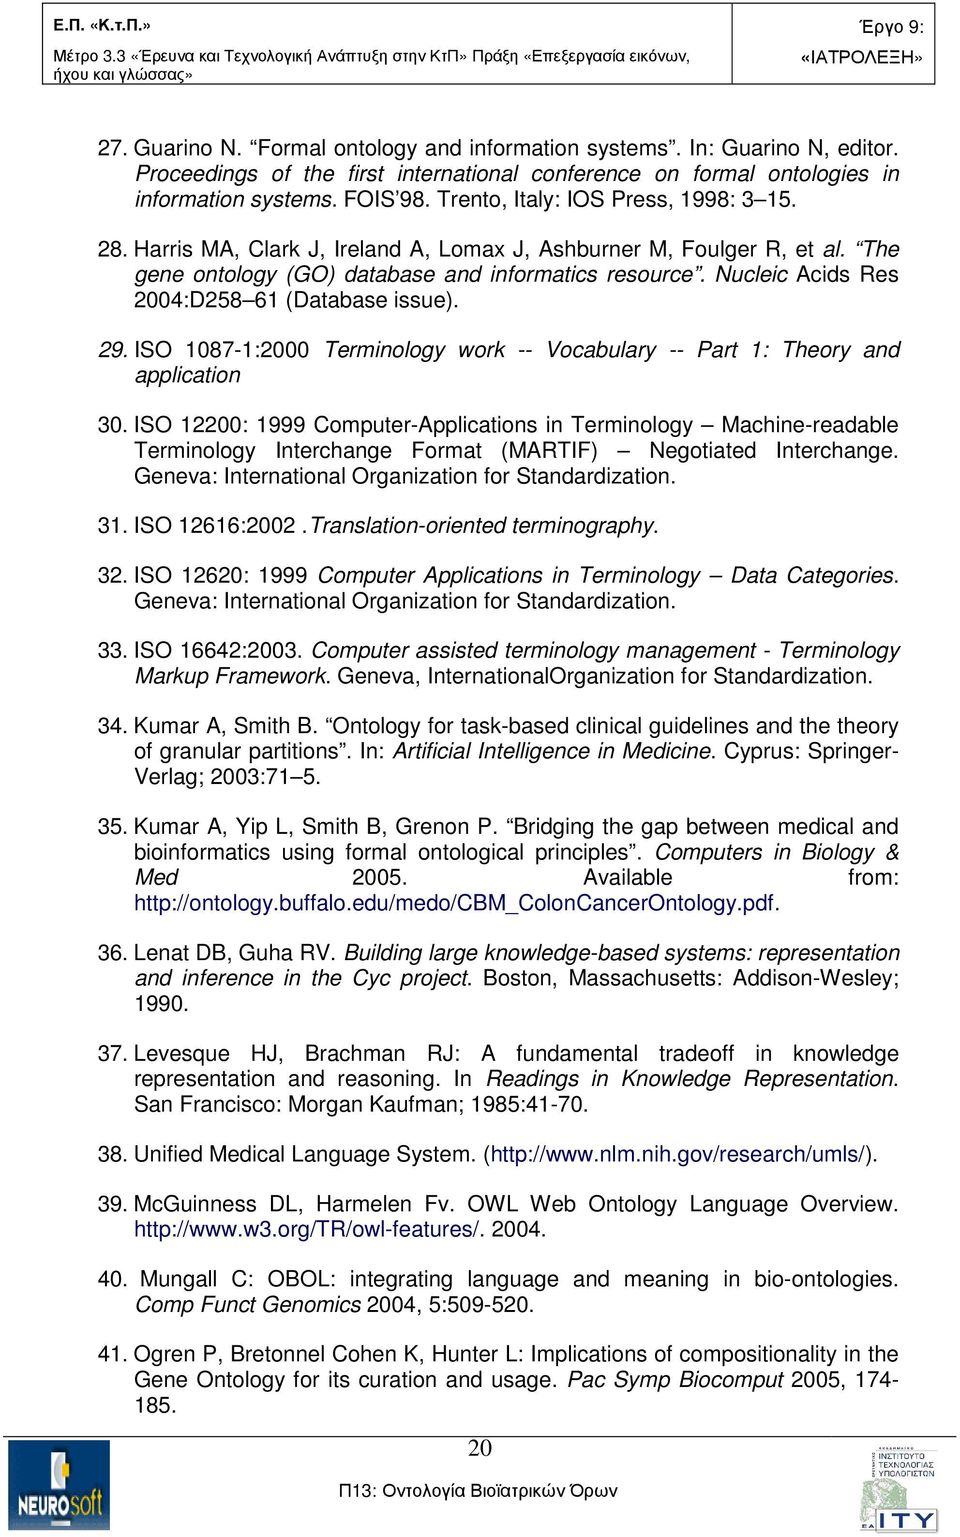 Nucleic Acids Res 2004:D258 61 (Database issue). 29. ISO 1087-1:2000 Terminology work -- Vocabulary -- Part 1: Theory and application 30.